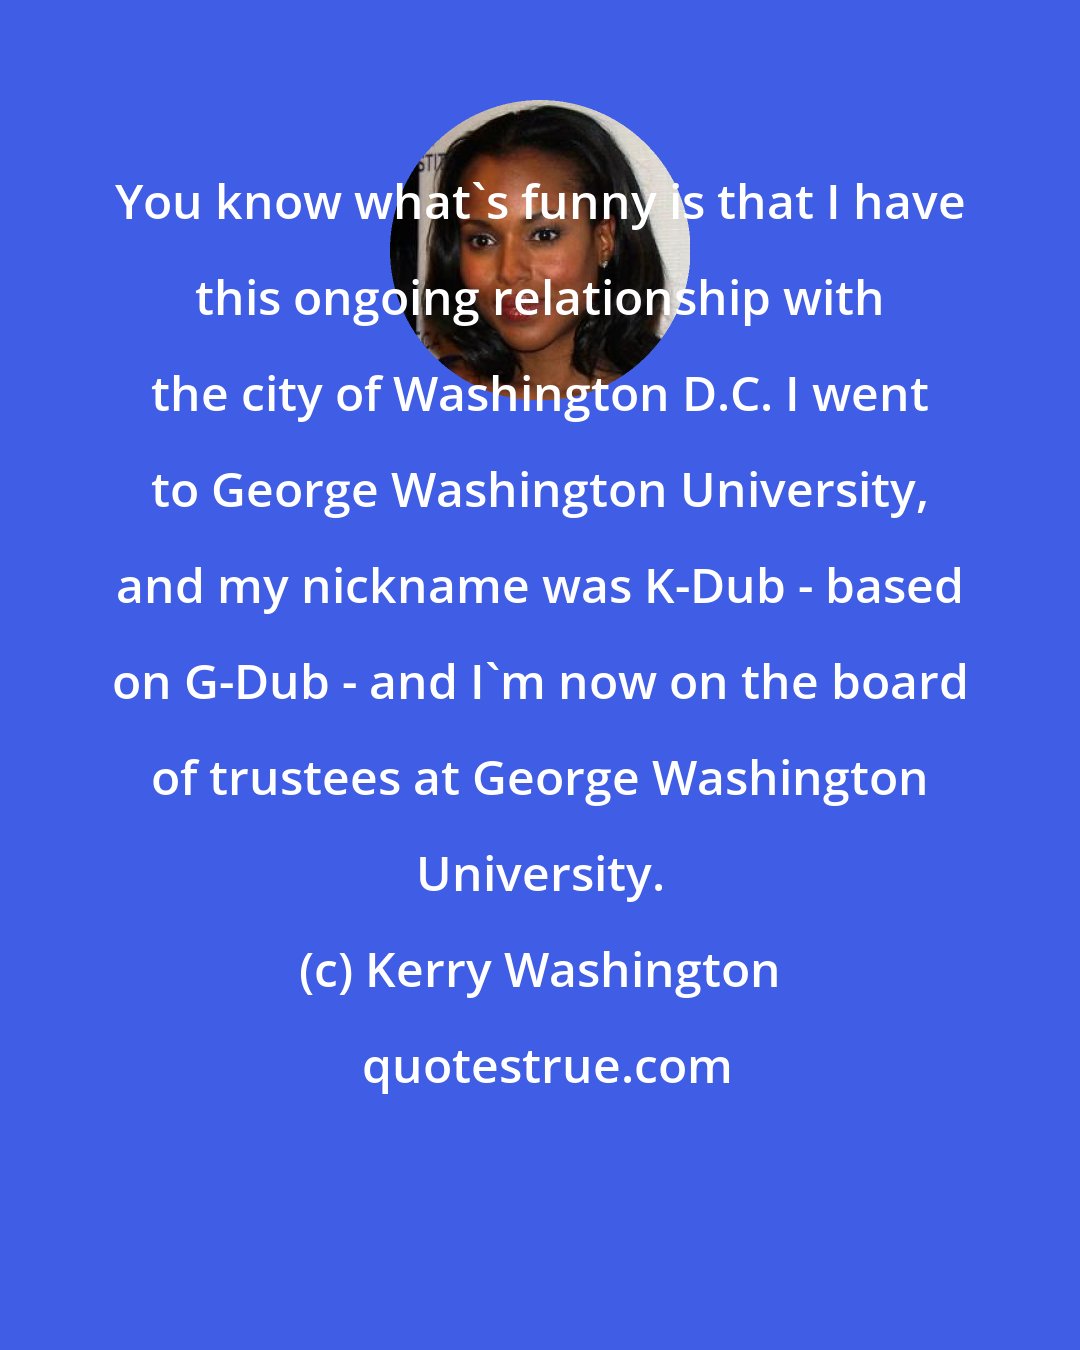 Kerry Washington: You know what's funny is that I have this ongoing relationship with the city of Washington D.C. I went to George Washington University, and my nickname was K-Dub - based on G-Dub - and I'm now on the board of trustees at George Washington University.